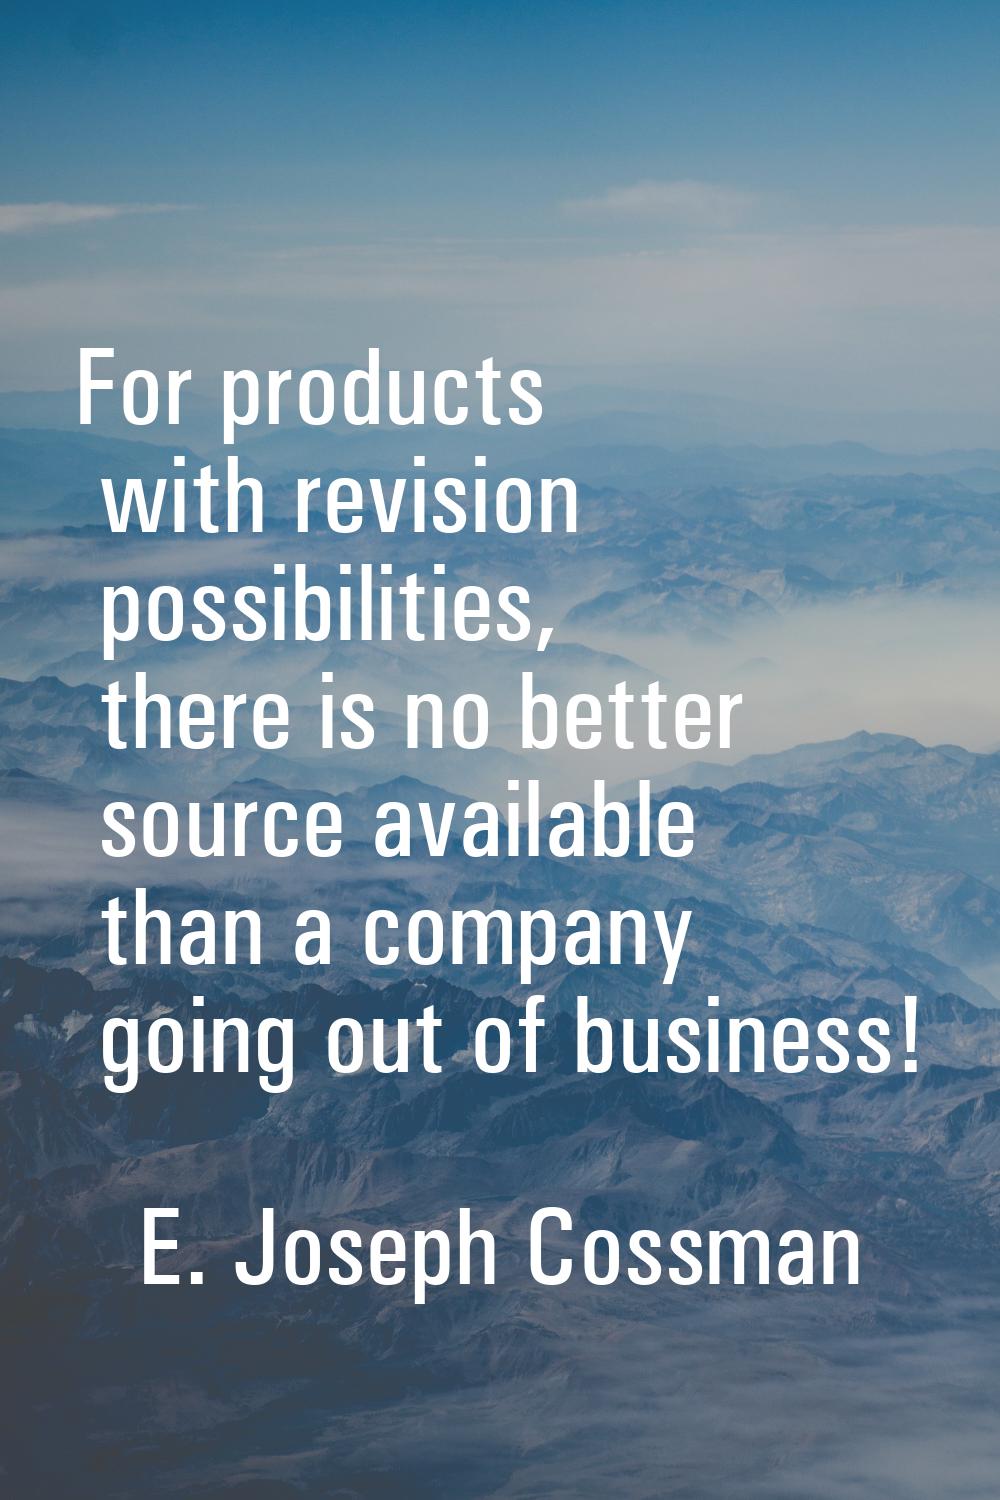 For products with revision possibilities, there is no better source available than a company going 